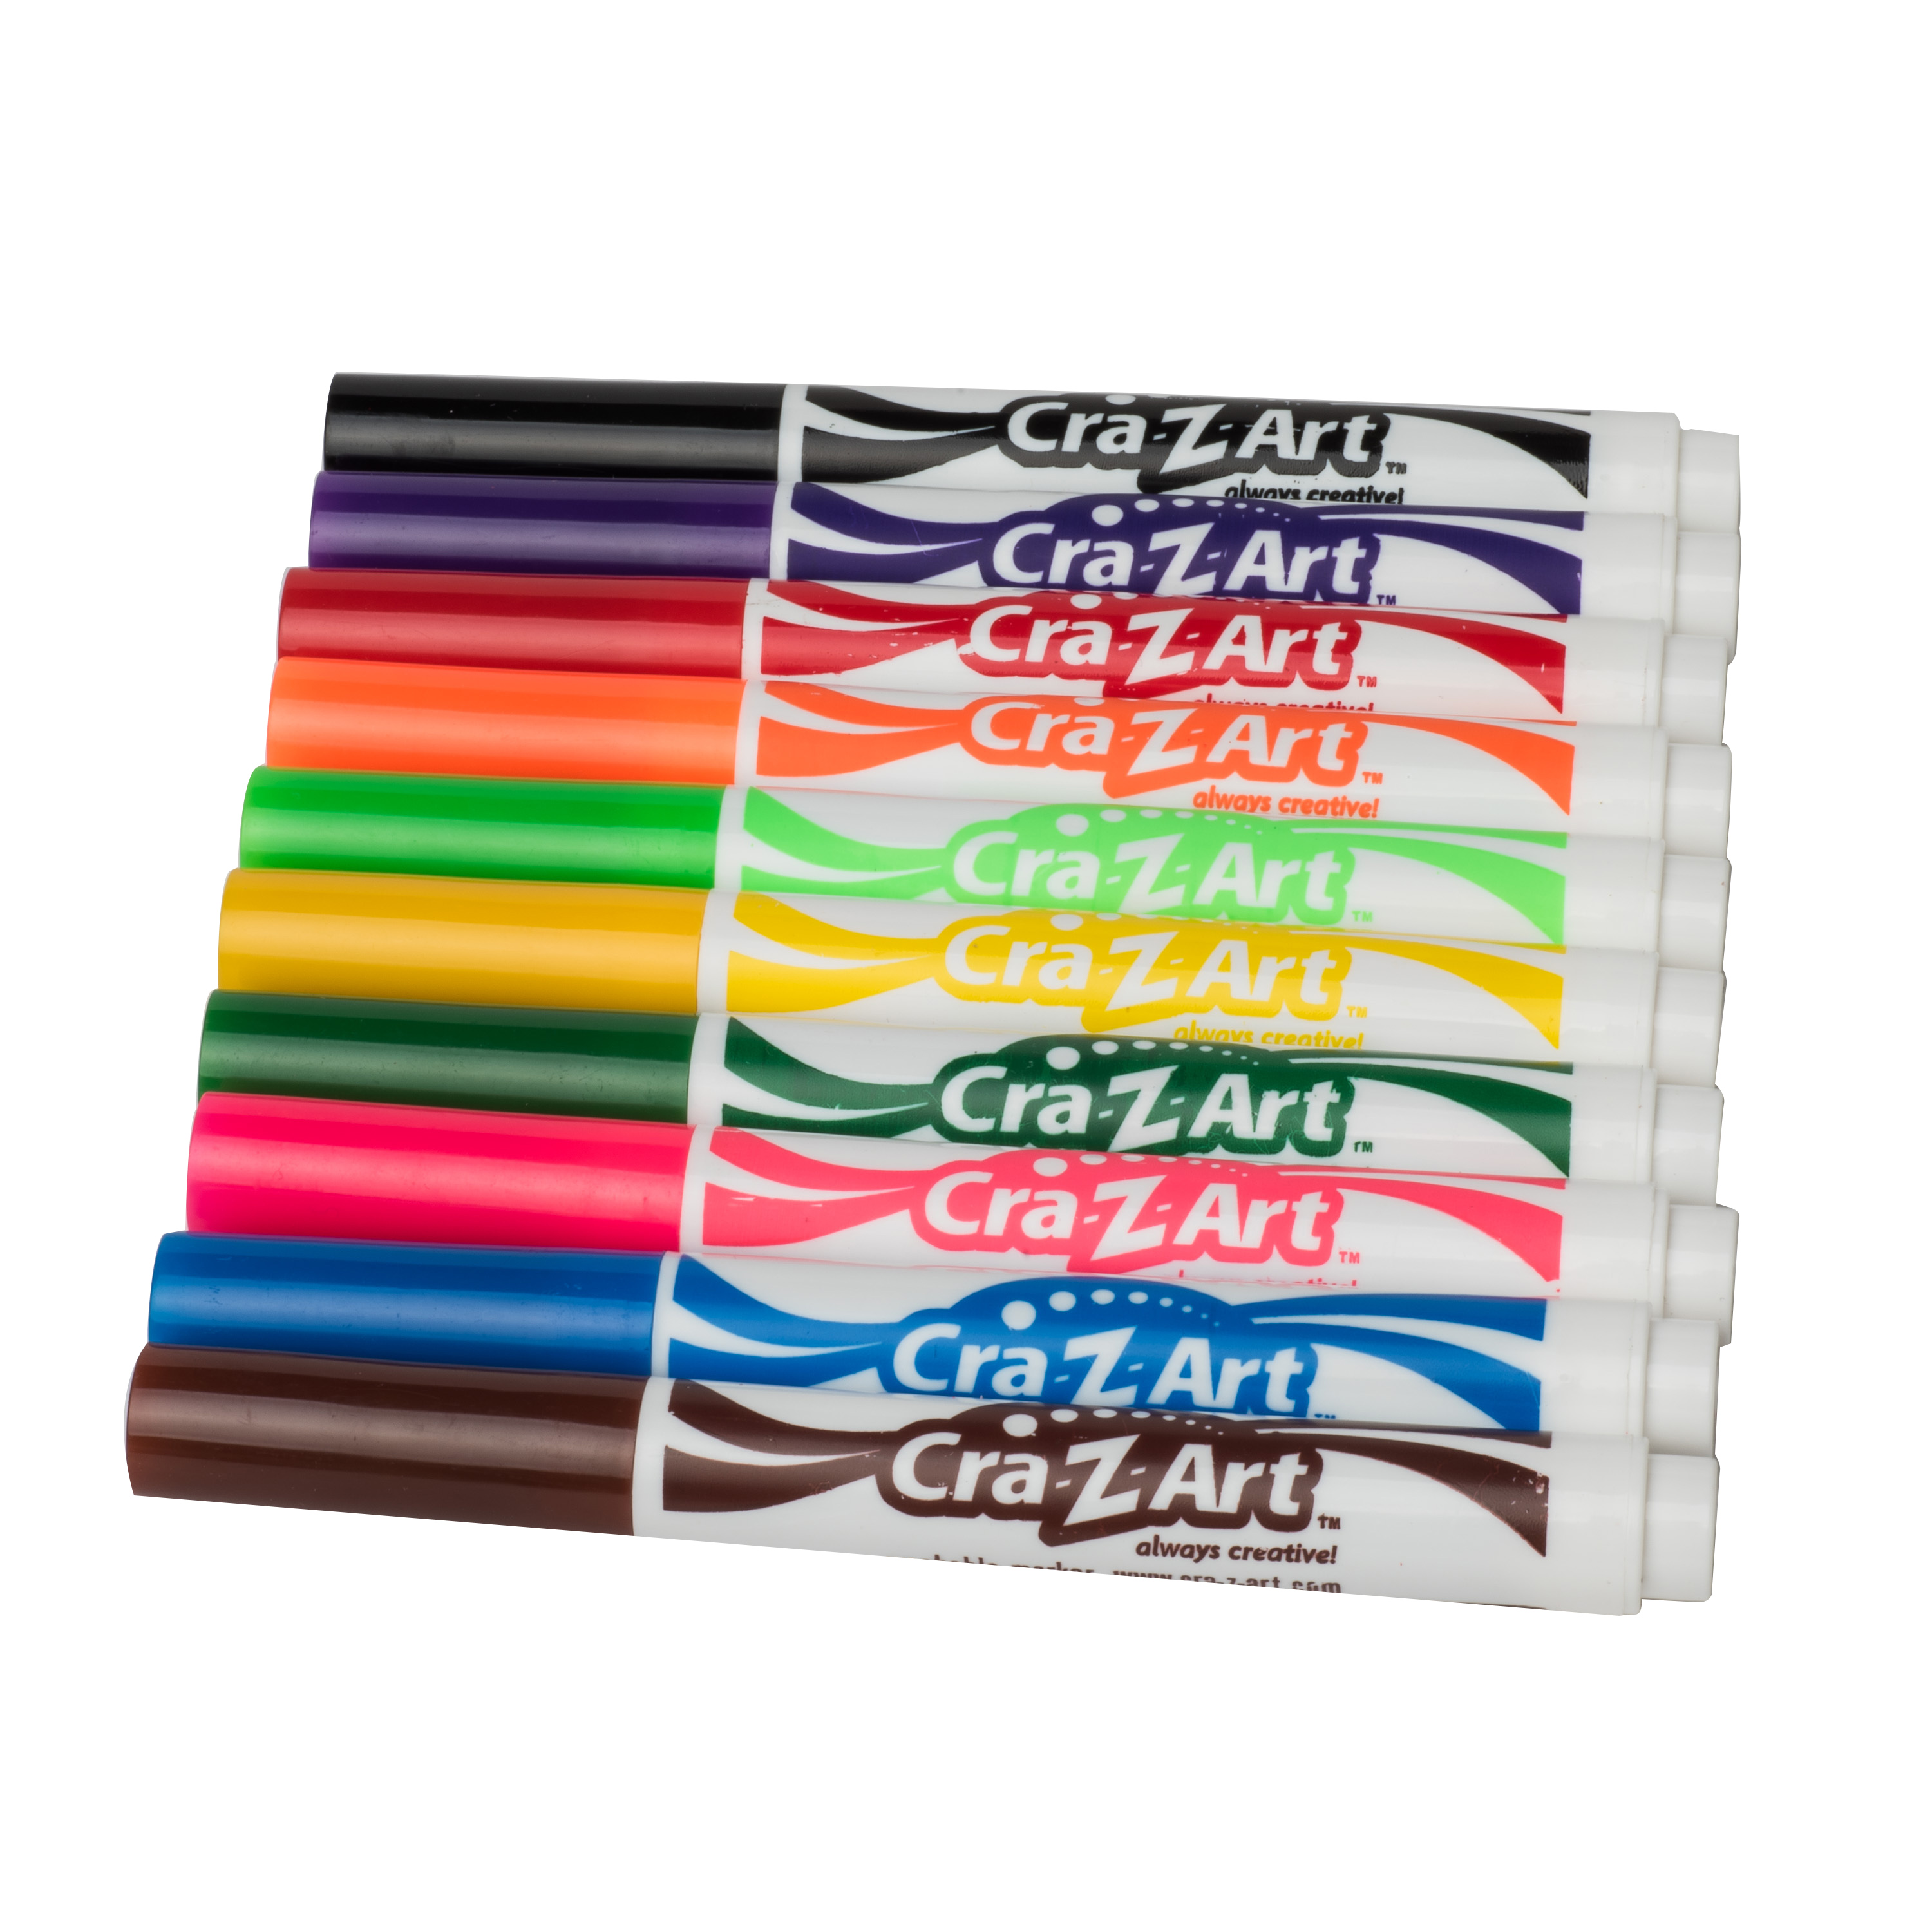 Cra-Z-Art Classic Multicolor Broad Line Washable Markers, 10 Count, Back to School Supplies - image 7 of 11